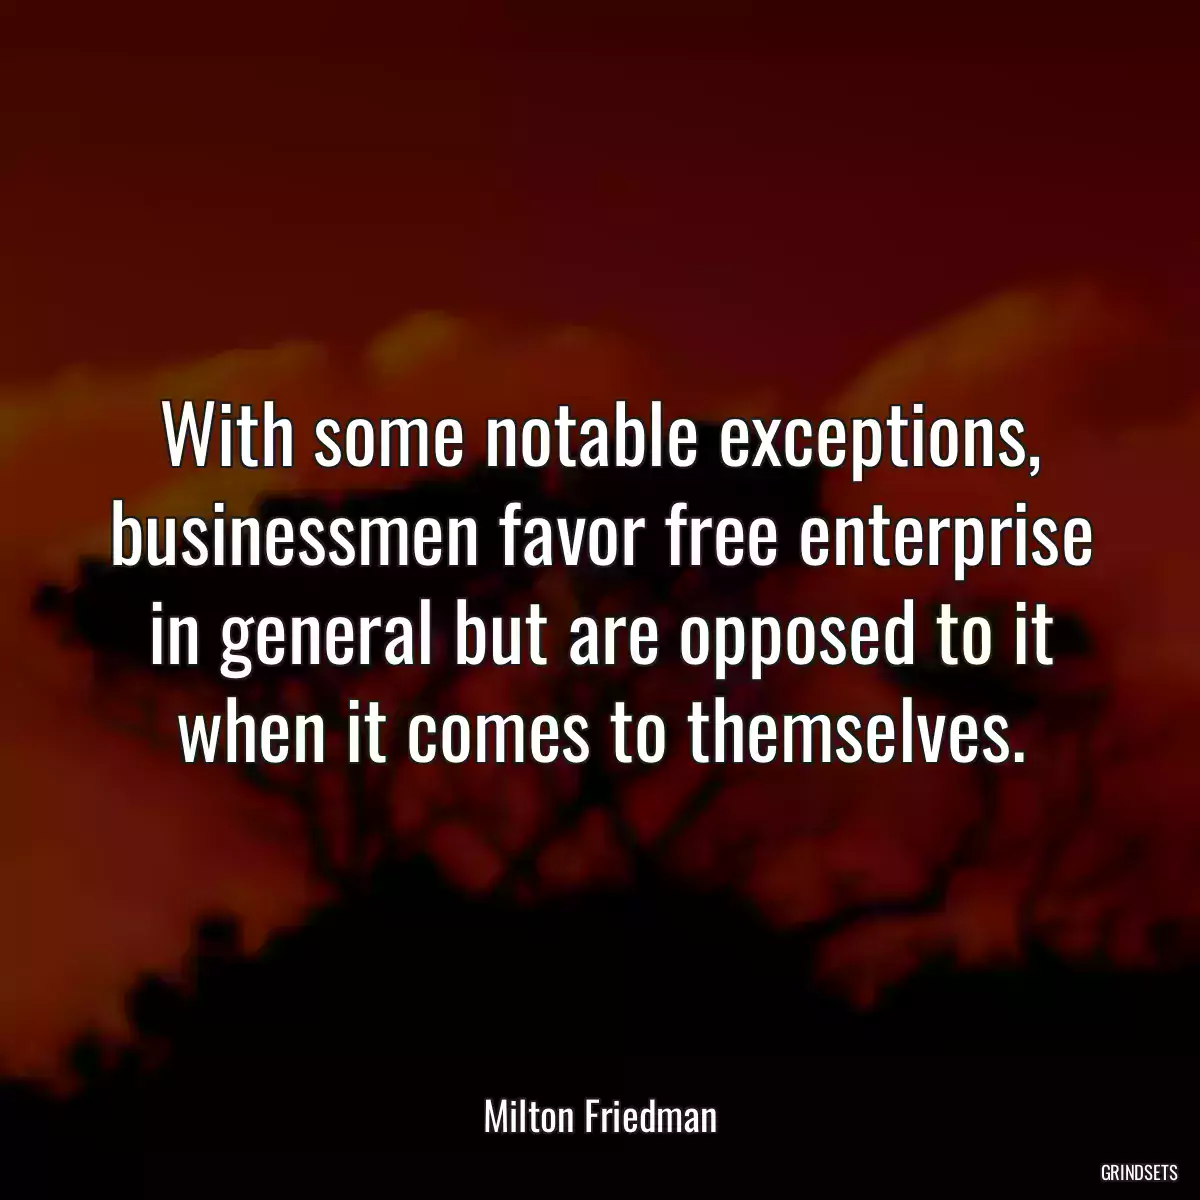 With some notable exceptions, businessmen favor free enterprise in general but are opposed to it when it comes to themselves.